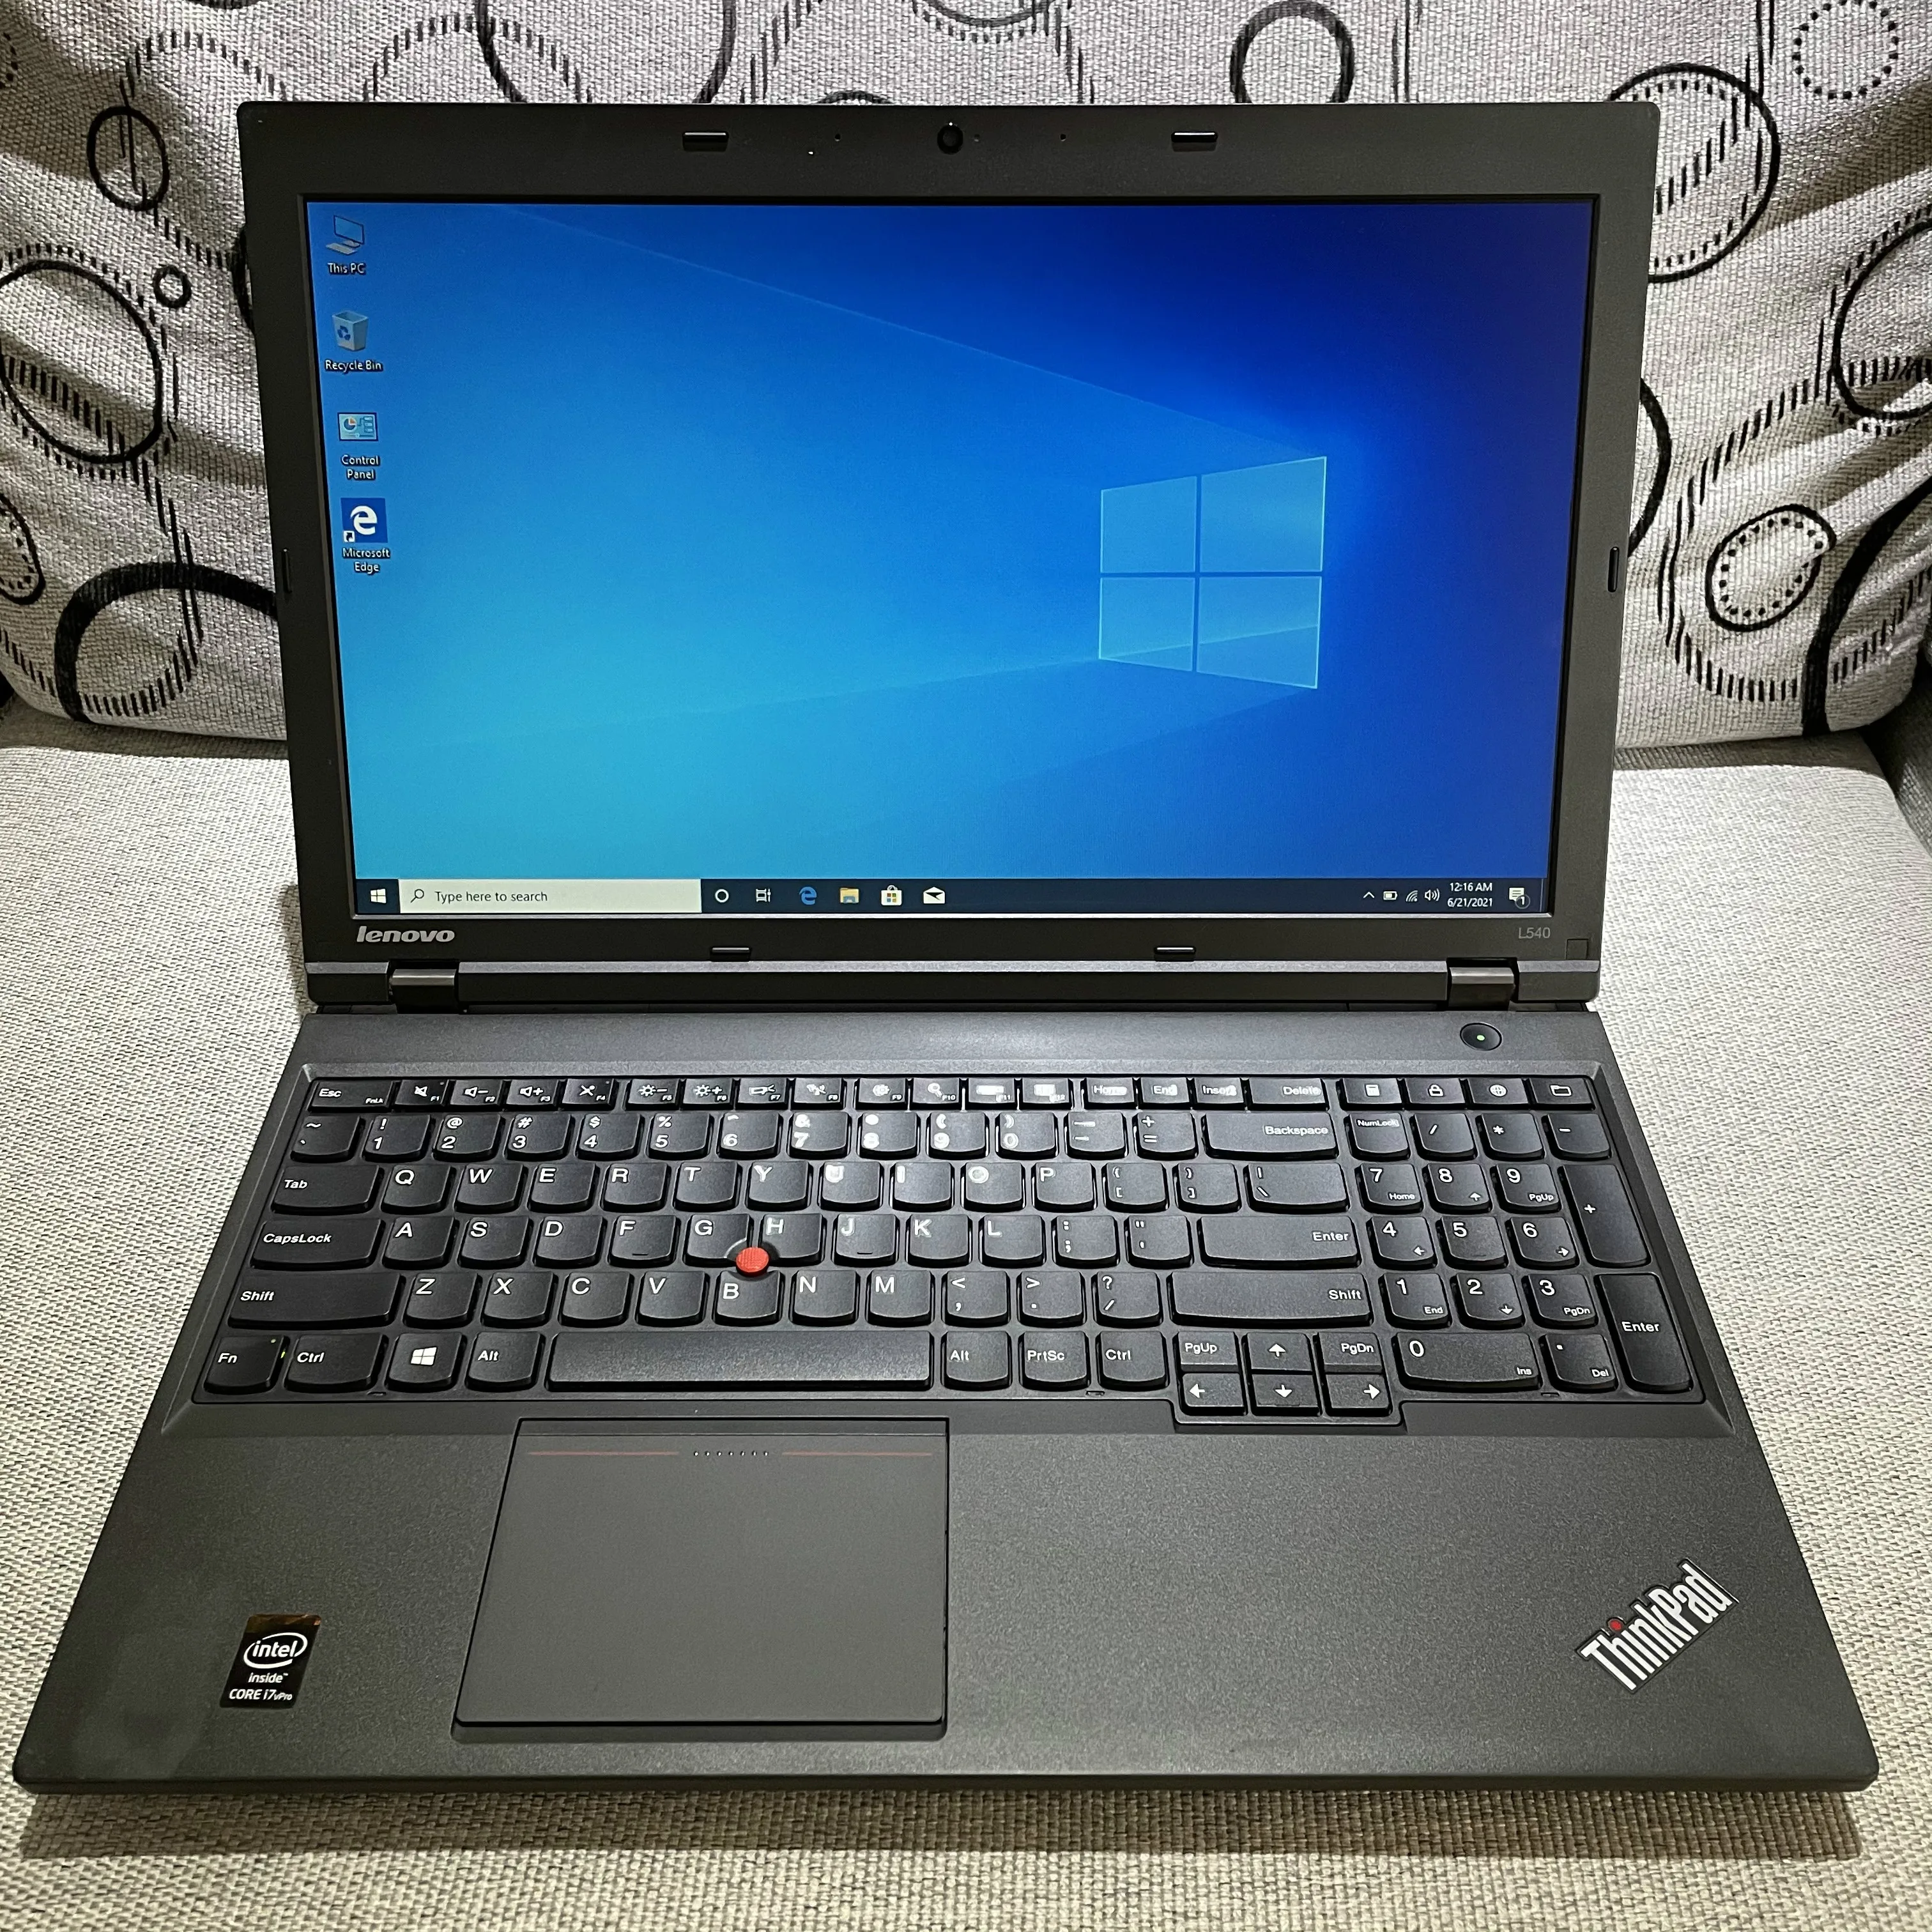 

used laptop computer L540 L560 Dual Core I5 I7 15.6inch second hand laptop thinkpad business gaming computer numeric keyboard, Black